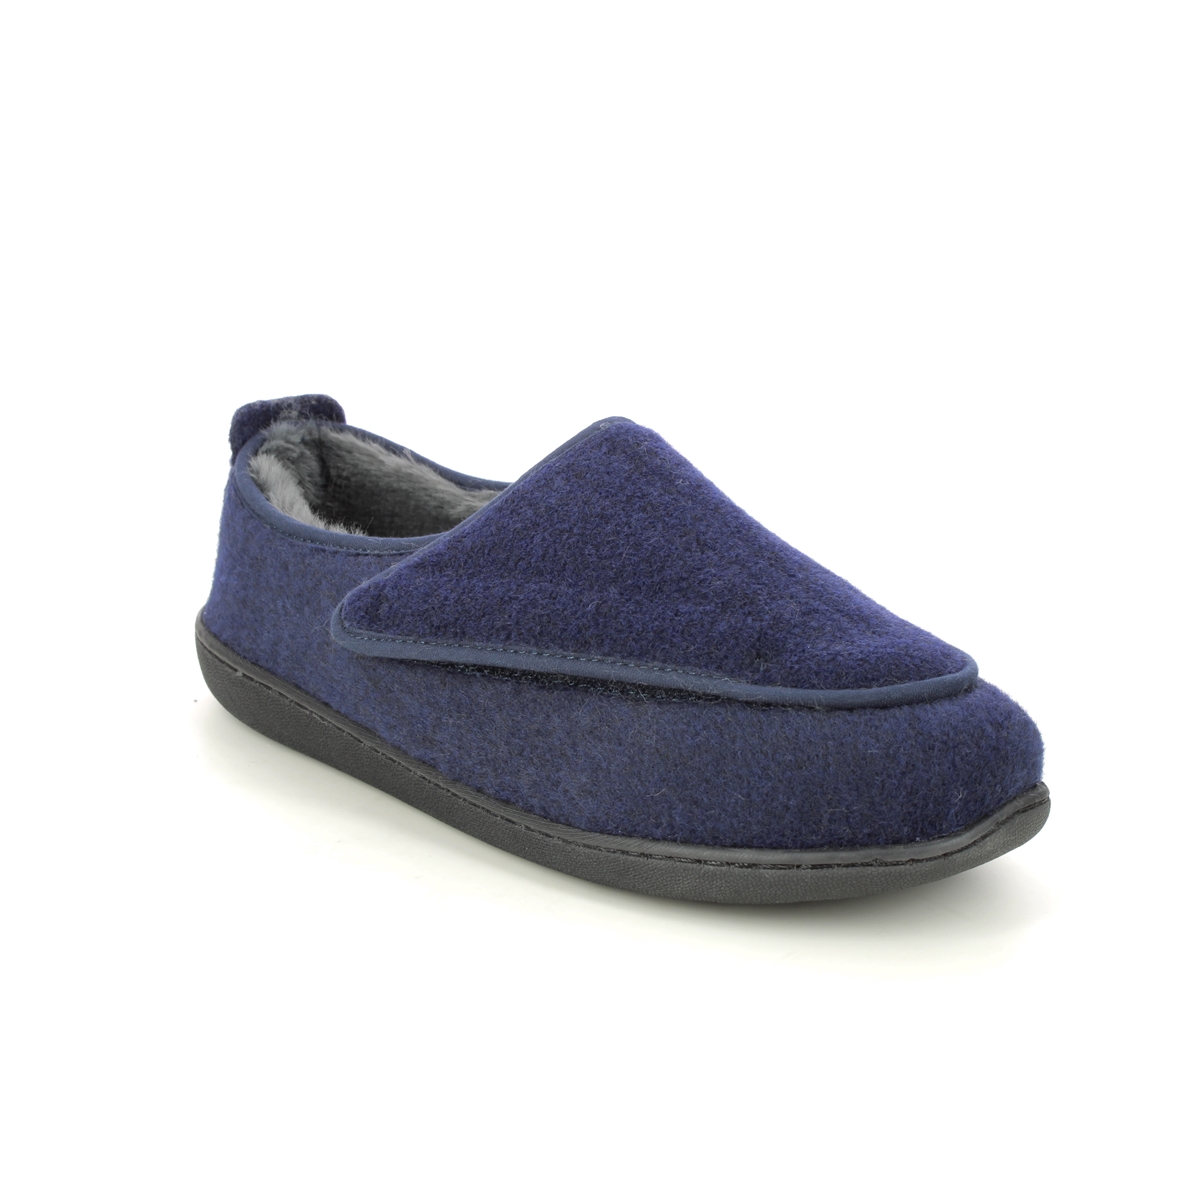 Clarks King Riptape Navy Mens slippers 6434-97G in a Plain Textile in Size 8